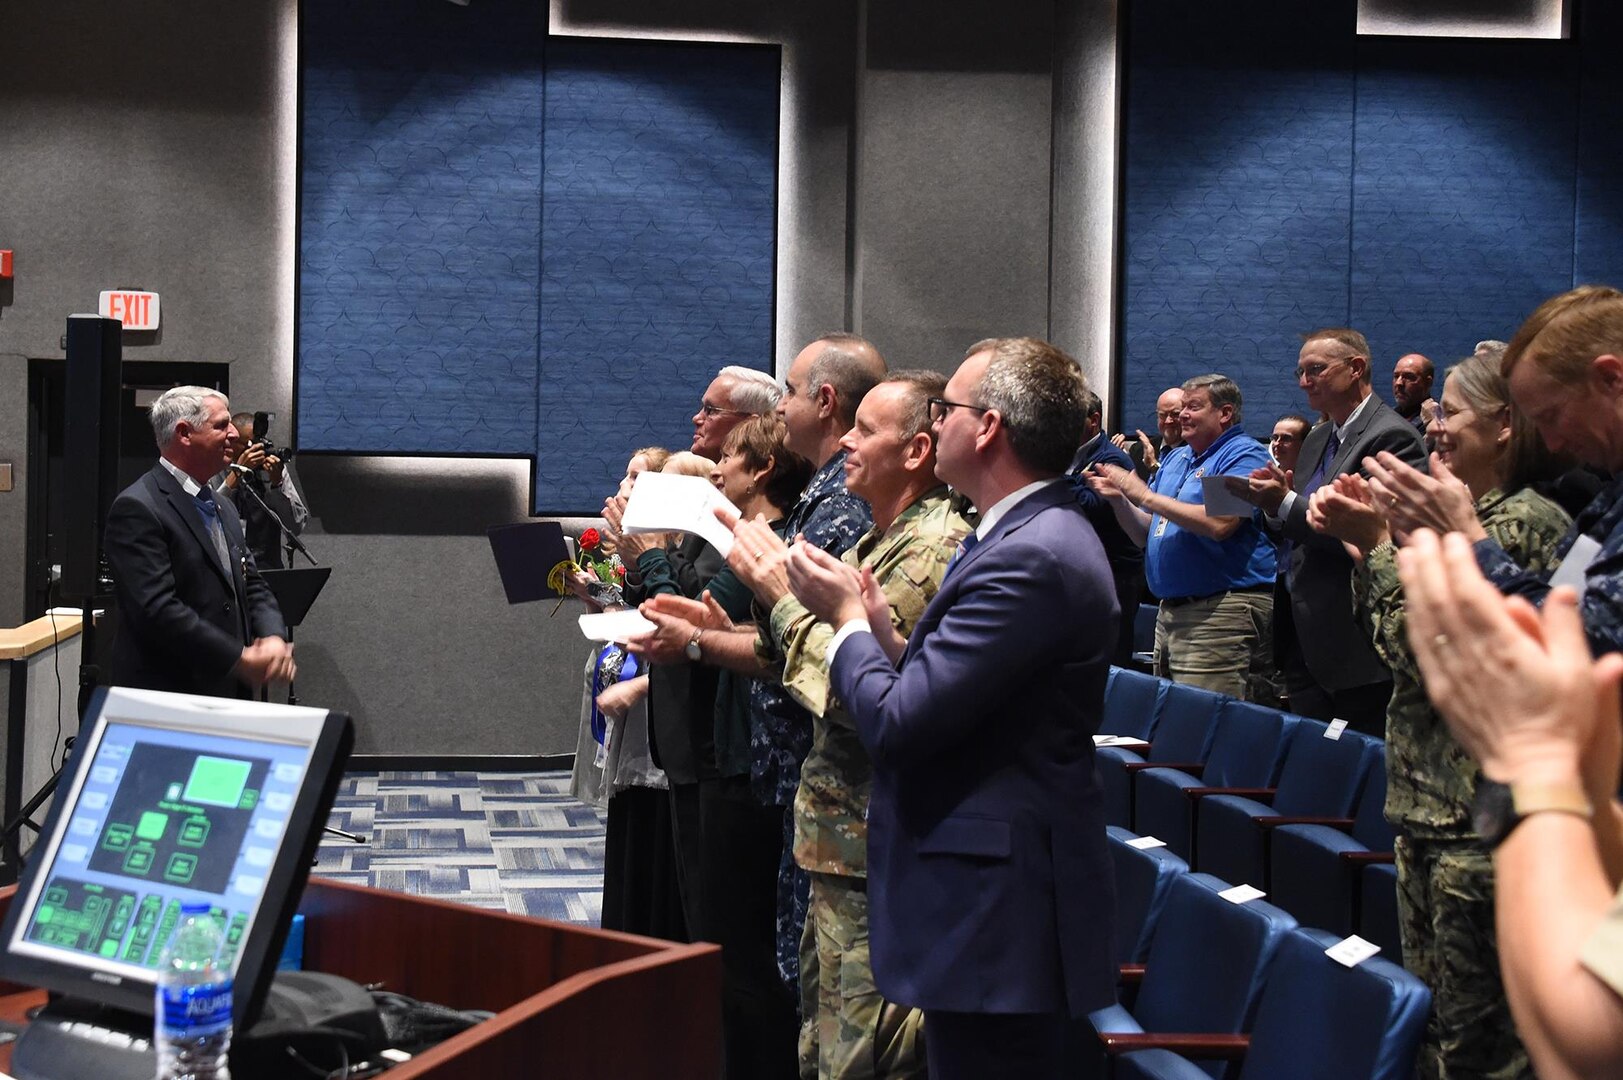 Dr. William Astley, U.S. Strategic Command (USSTRATCOM) resiliency coordinator, receives a standing ovation following his retirement ceremony at Offutt Air Force Base, Neb., Nov. 30, 2017. Astley retired after 36-plus years of service as an Air Force officer and government civilian. Throughout his 11 years with USSTRATCOM, Astley led a team that developed several programs and activities to ensure members of the command remain sharp, fresh and productive. One of nine Department of Defense unified combatant commands, USSTRATCOM has global responsibilities assigned through the Unified Command Plan that include strategic deterrence, nuclear operations, space operations, joint electromagnetic spectrum operations, global strike, missile defense, and analysis and targeting.